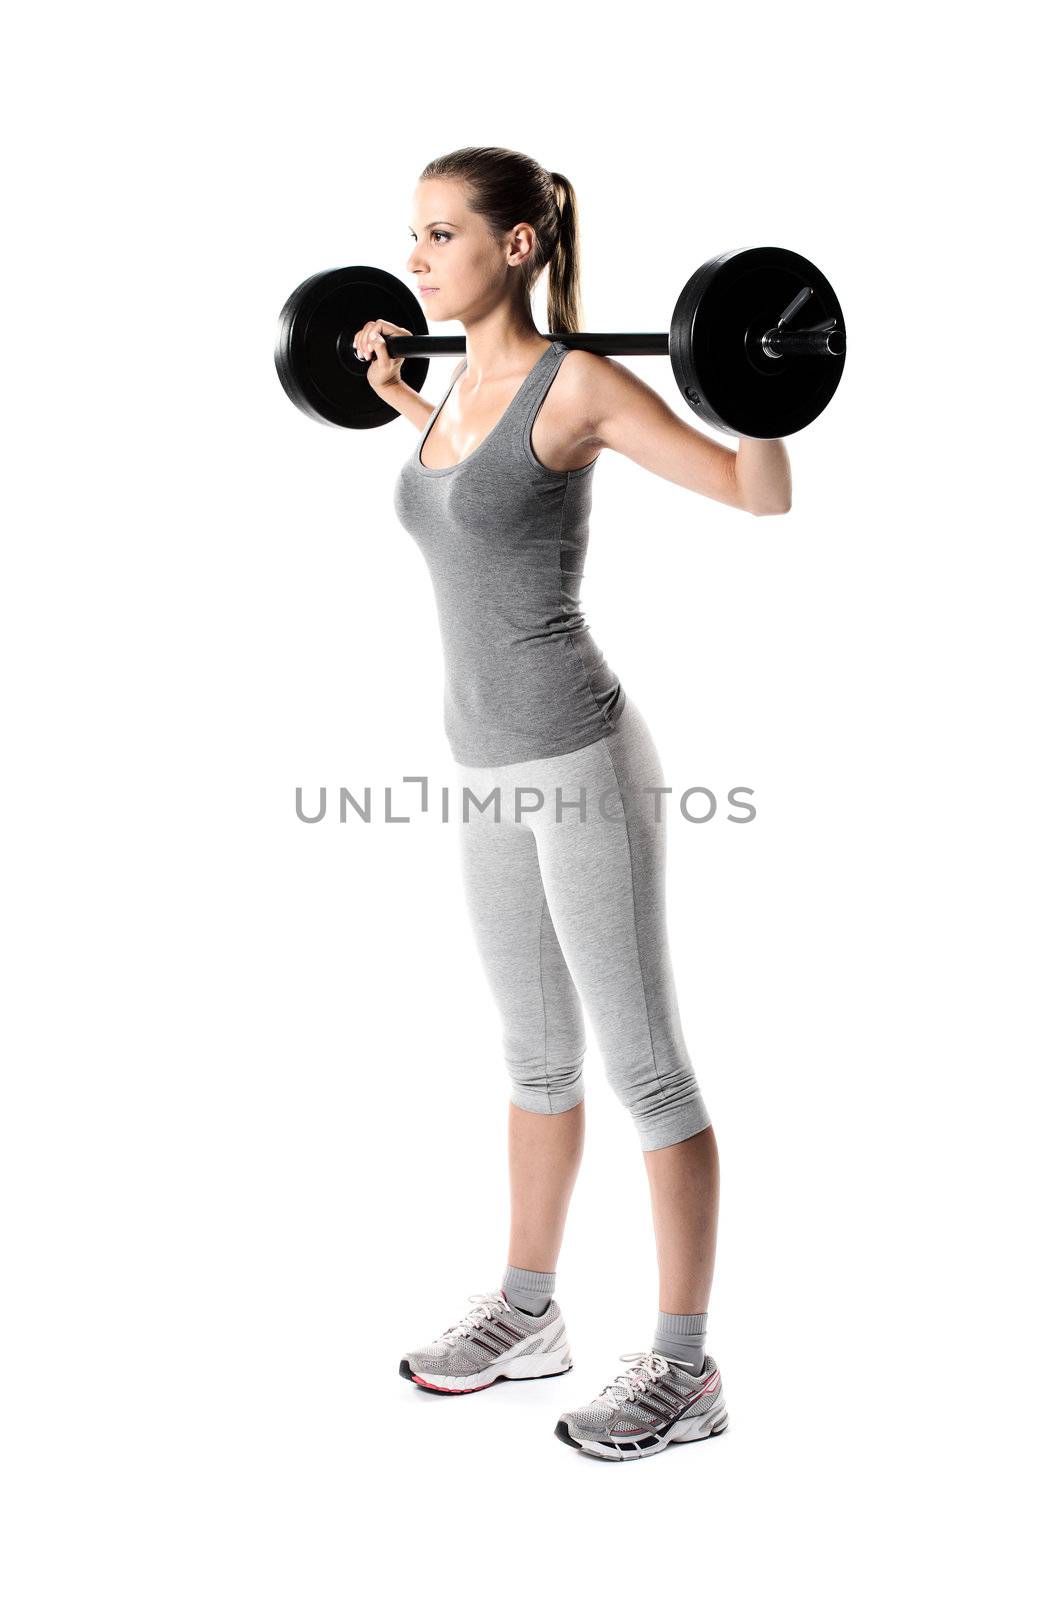 young woman weight training